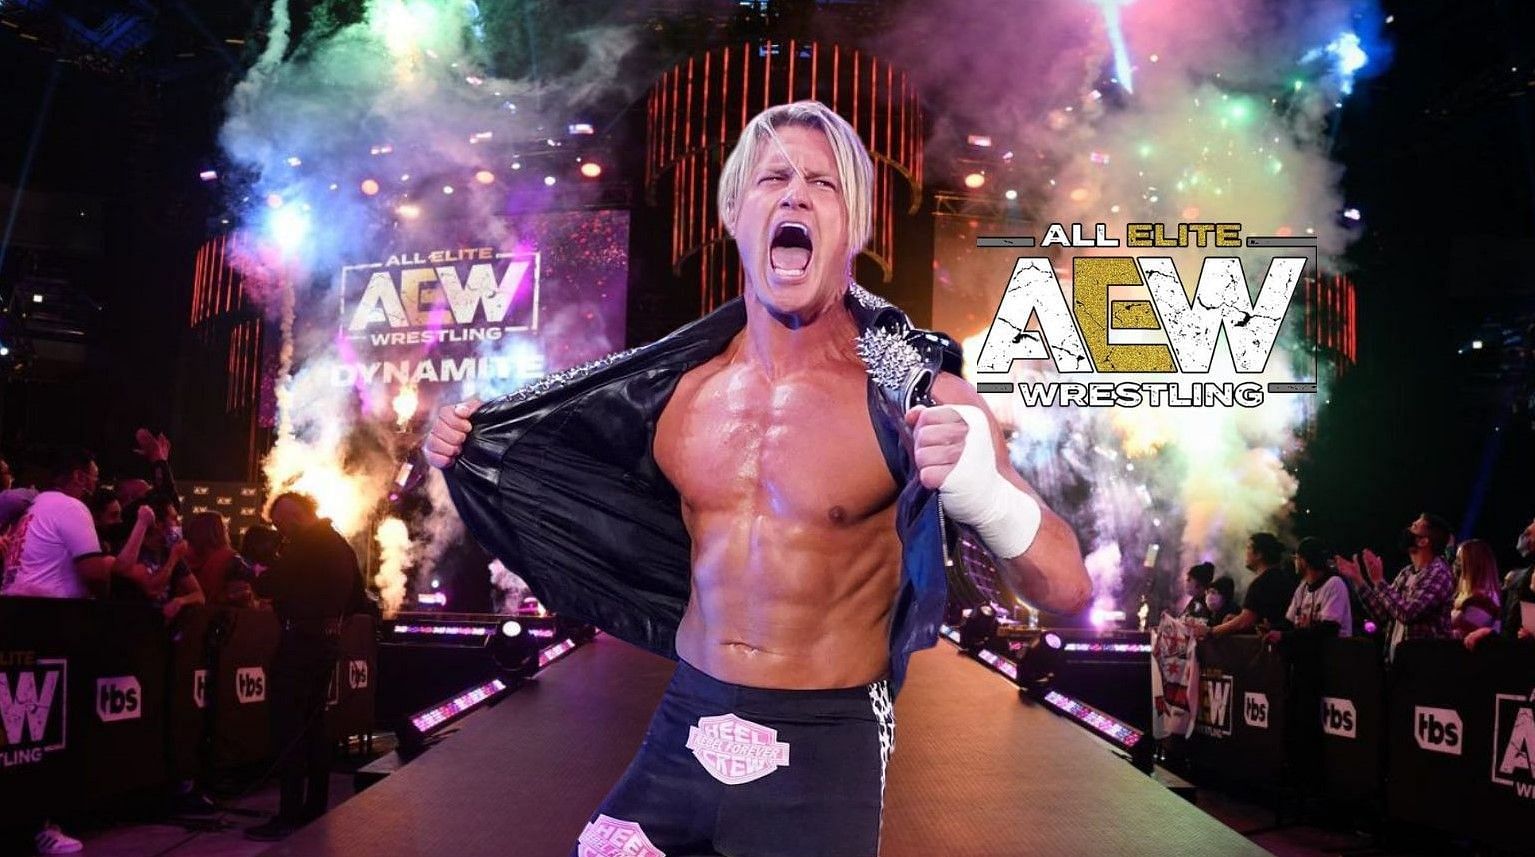 Dolph Ziggler might shock the world by going to AEW